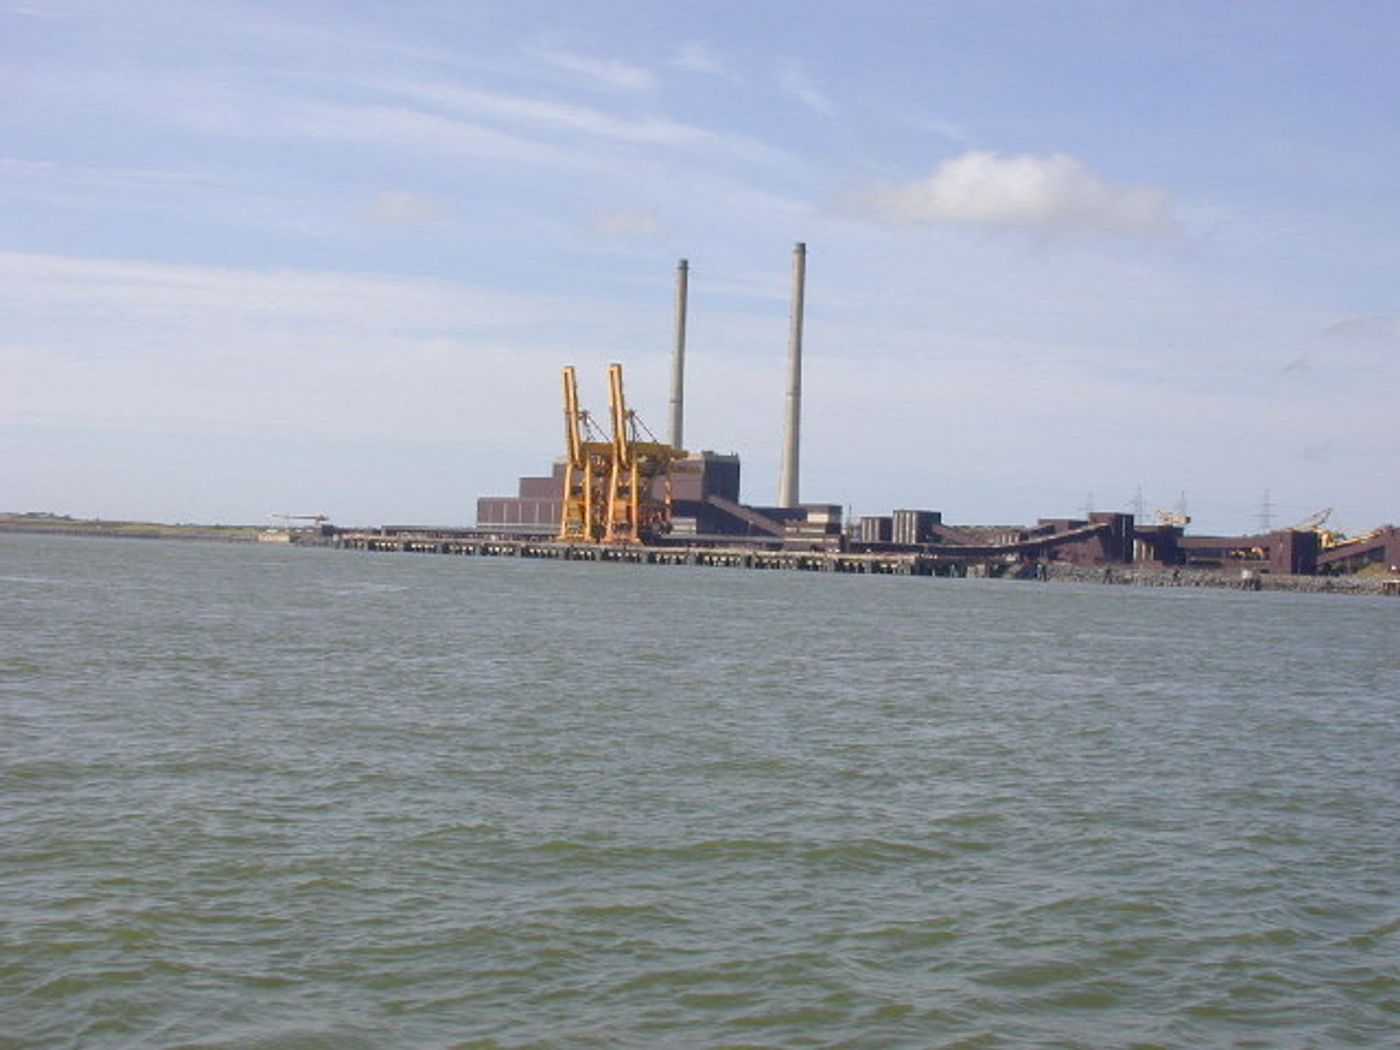 Moneypoint power station is Ireland's largest electricity generation station, powered mostly by coal. Image Credit: Charles W Glynn/Wikimedia Commons